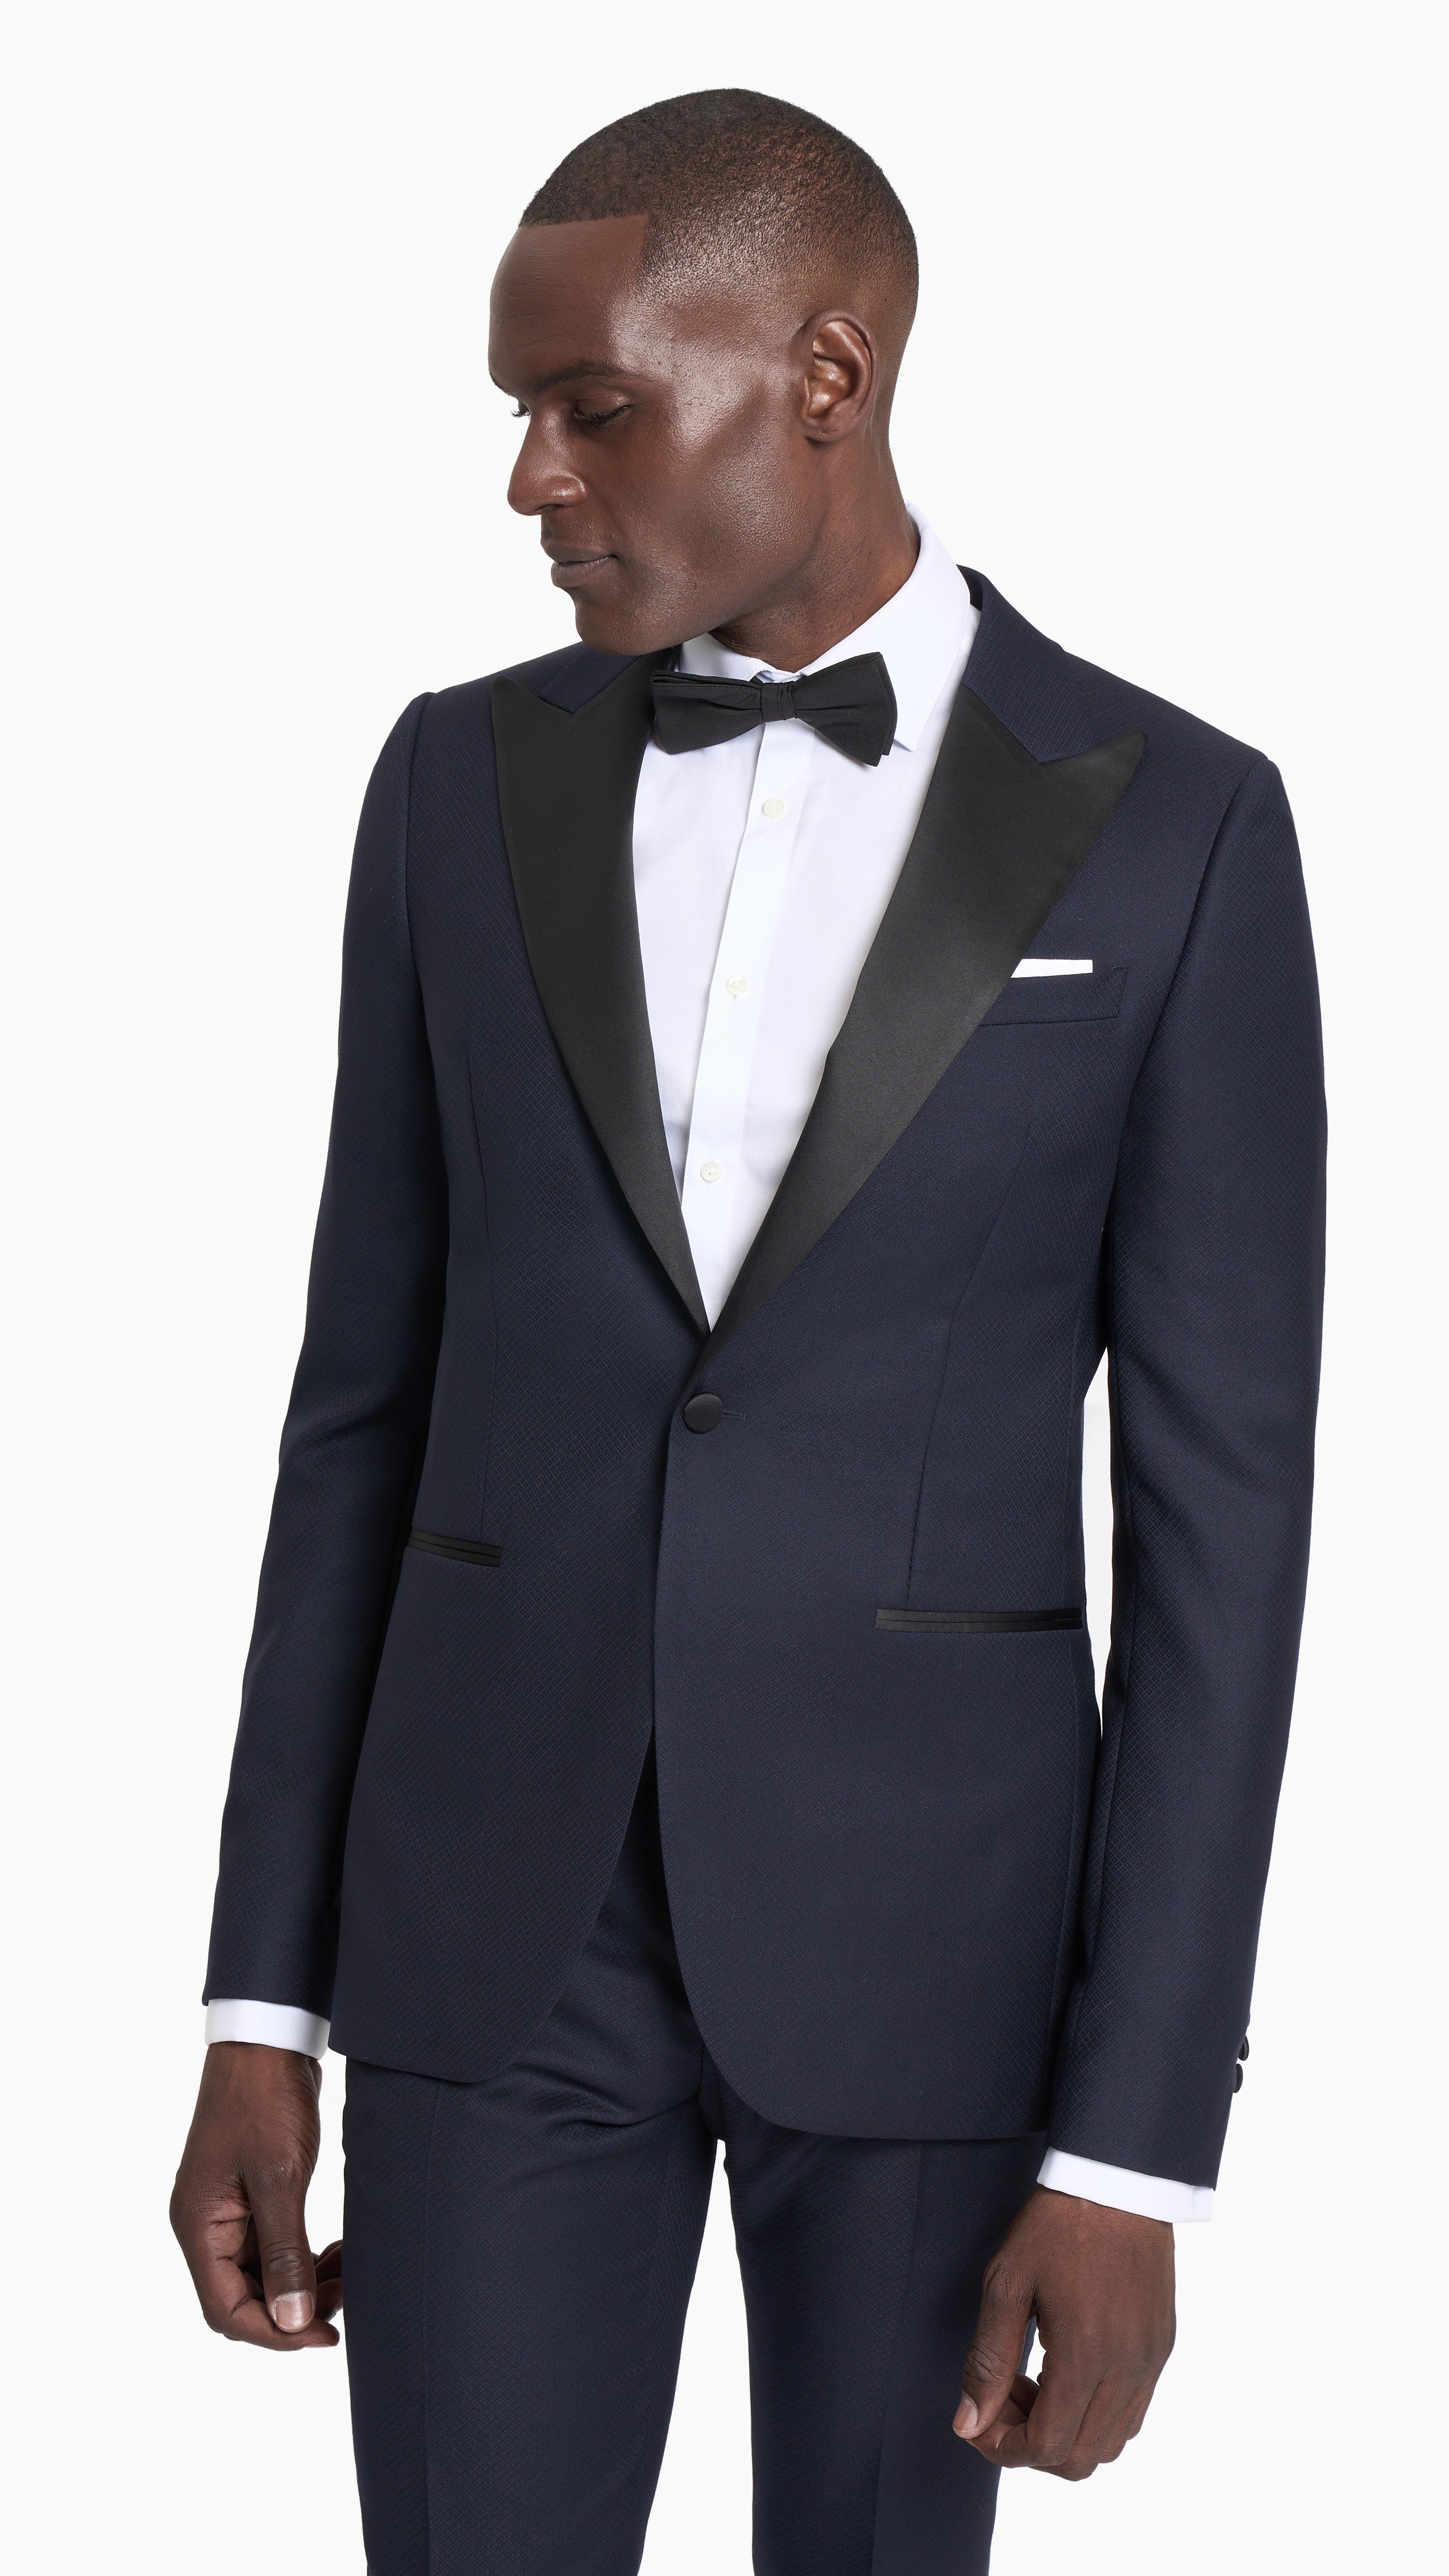 Men's Suits & Tuxedos | Free Home Try-On | Generation Tux